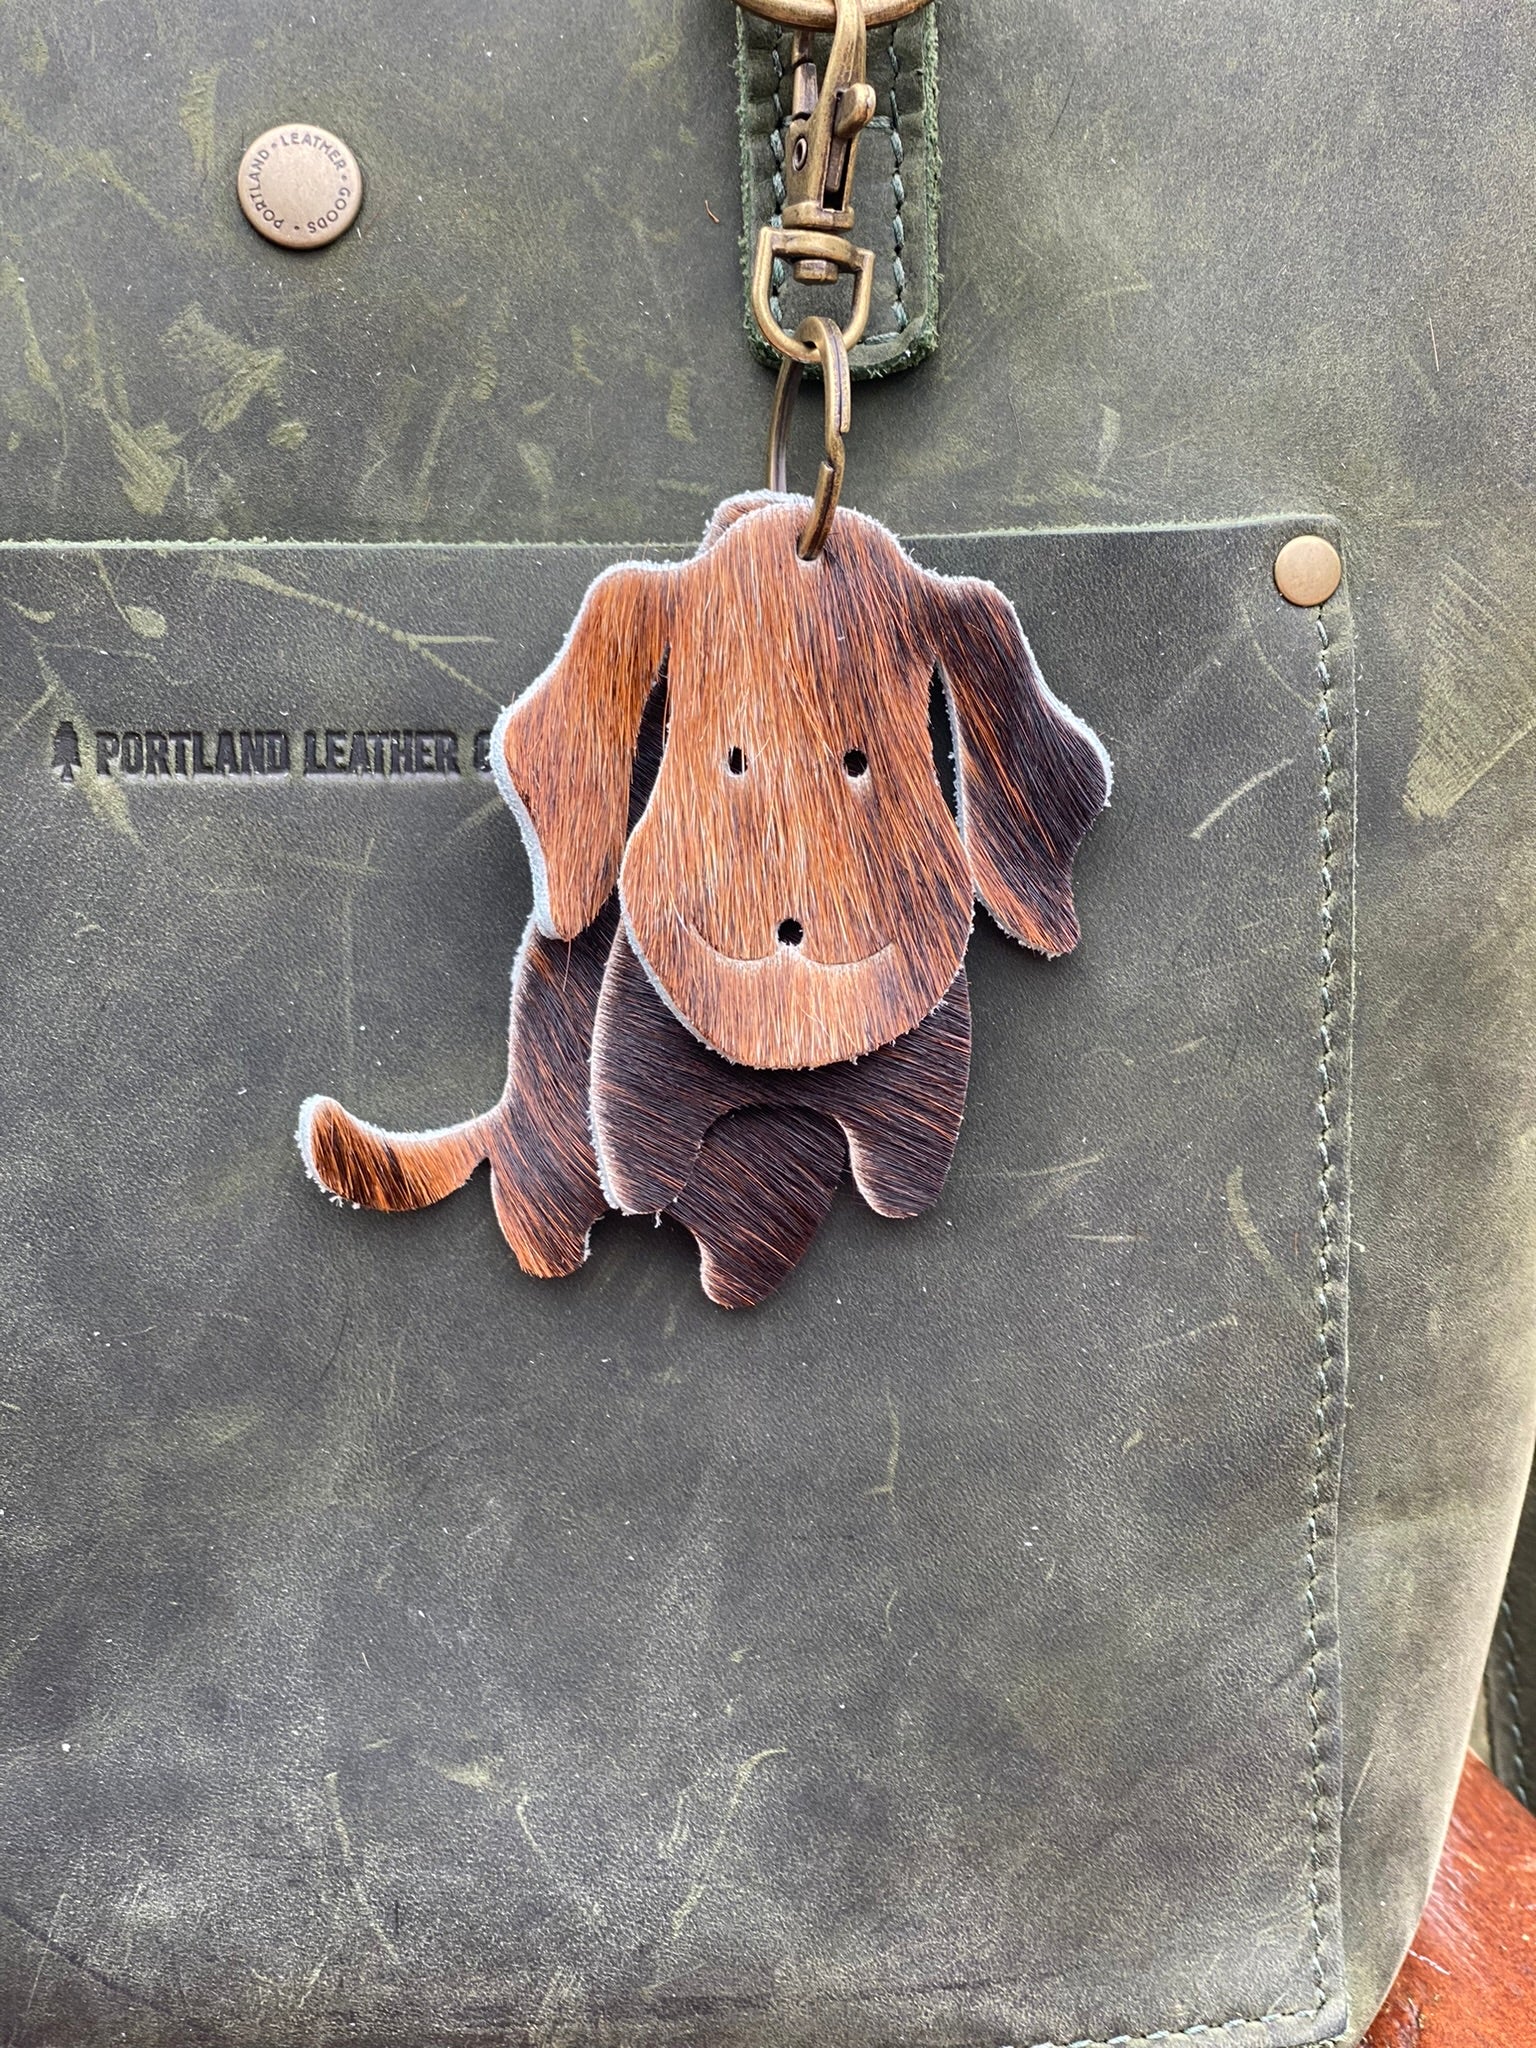 Hair on Cowhide Dog or Cat Keyring Purse Charm, Bag Clip on Dog or Cat Fob, Cute Dog or Cat Lovers Accessory